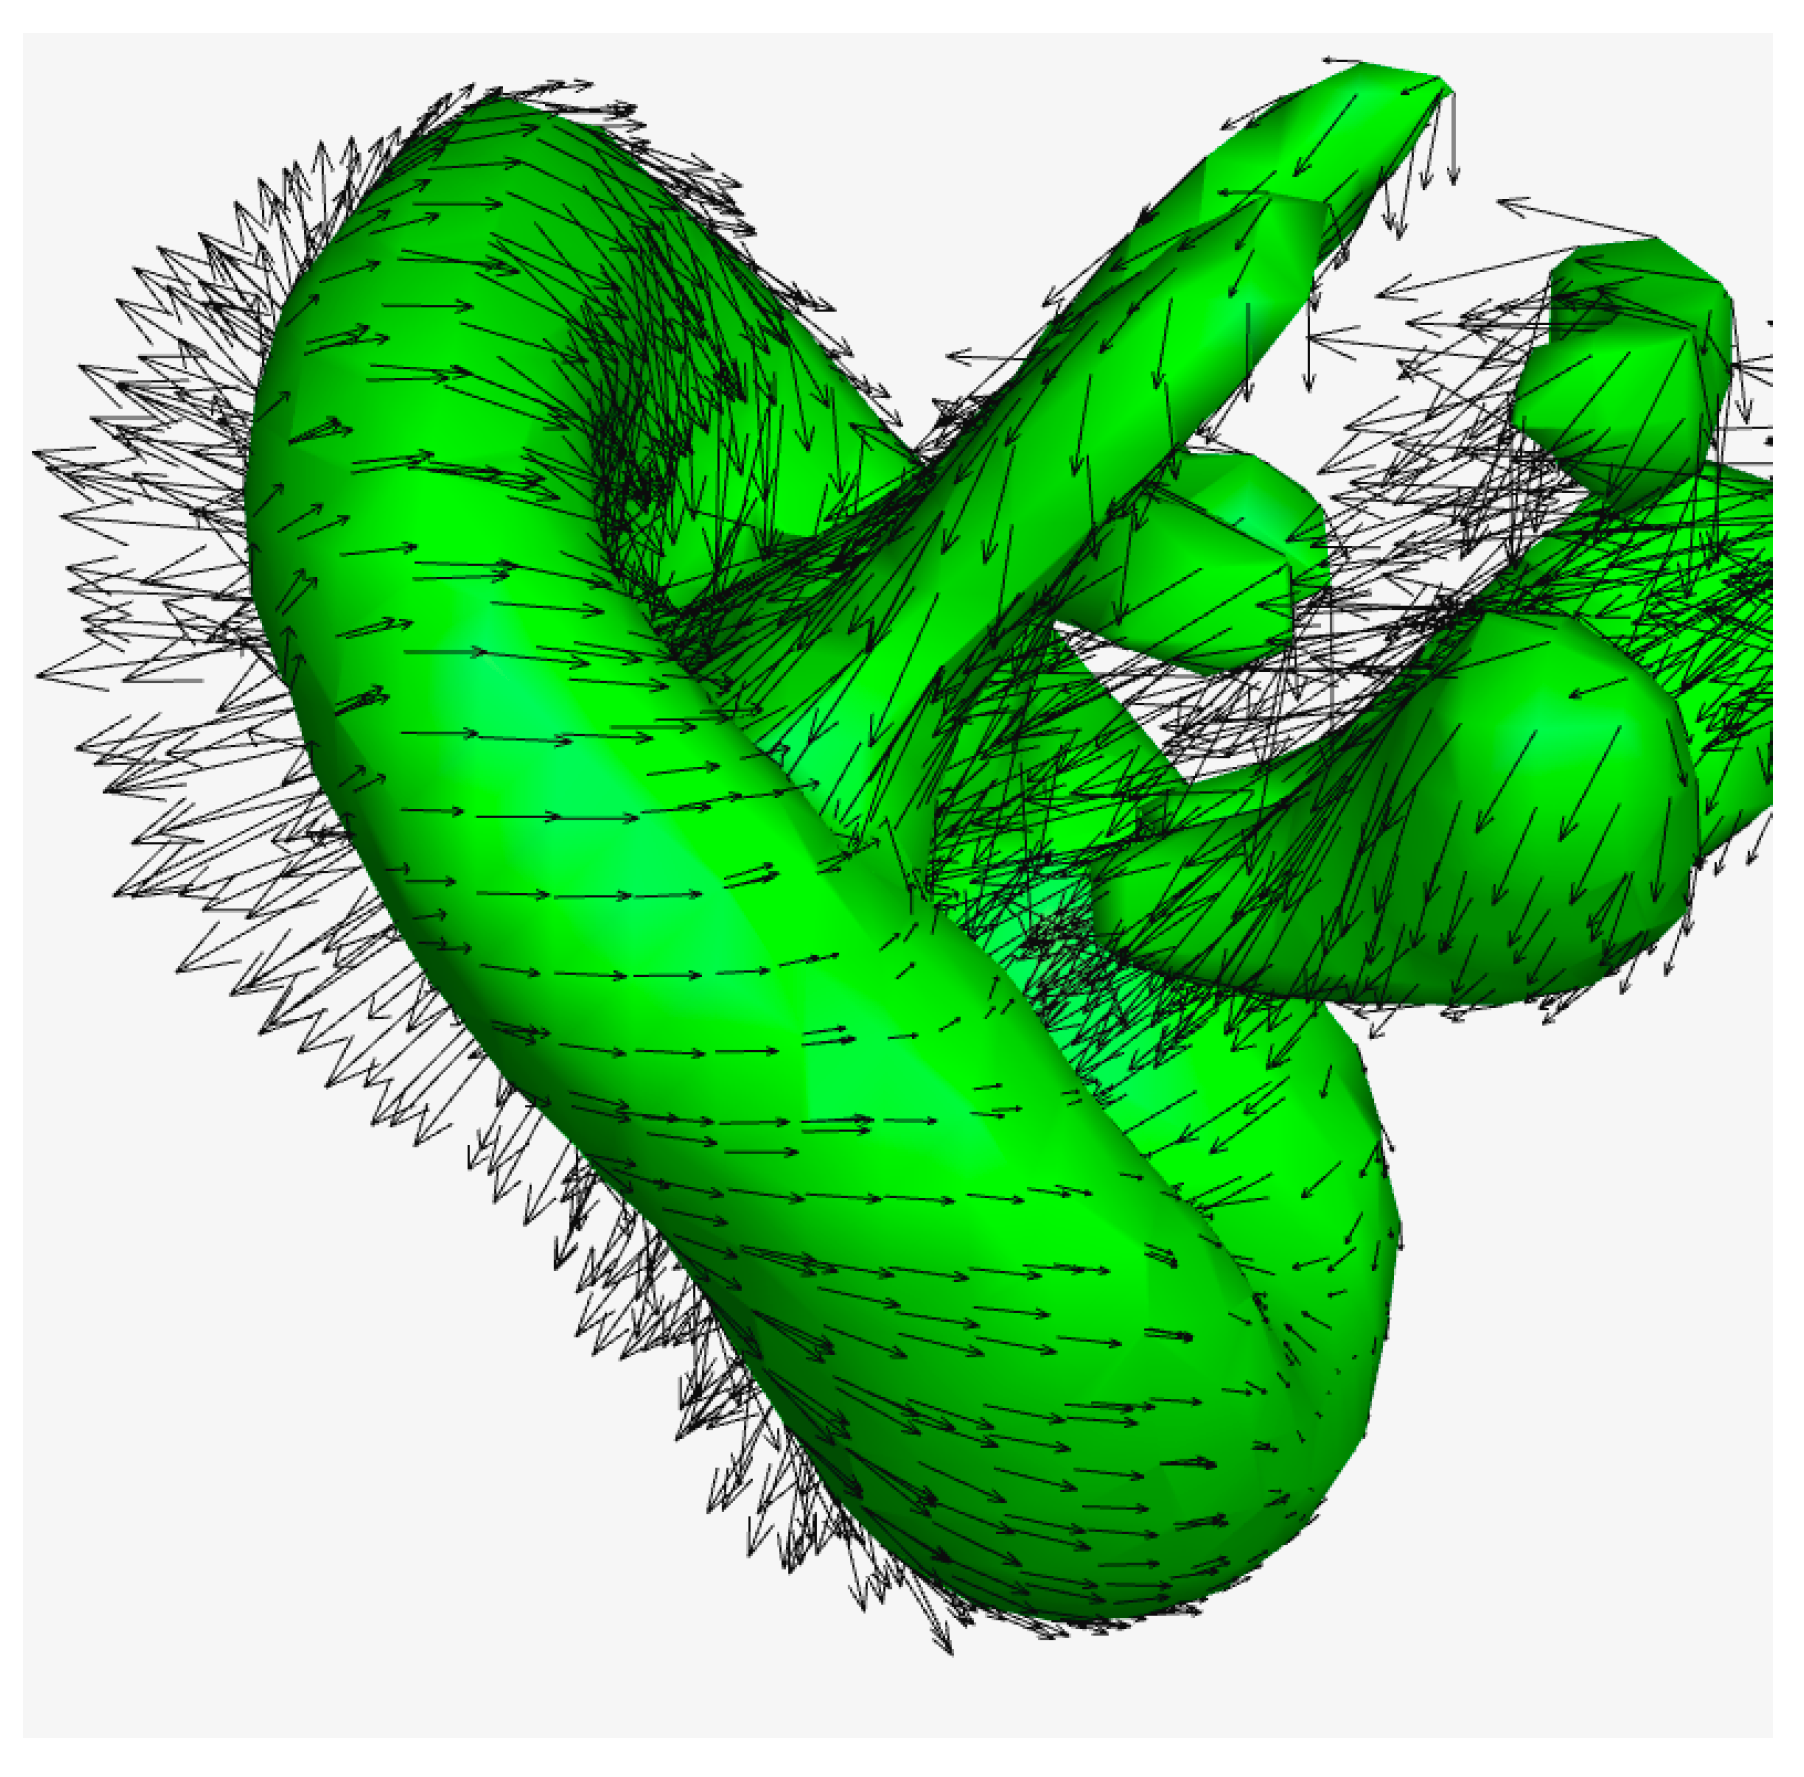 Metals | Free Full-Text | Lattice Boltzmann Method Modeling of the  Evolution of Coherent Vortices and Periodic Flow in a Continuous Casting  Mold